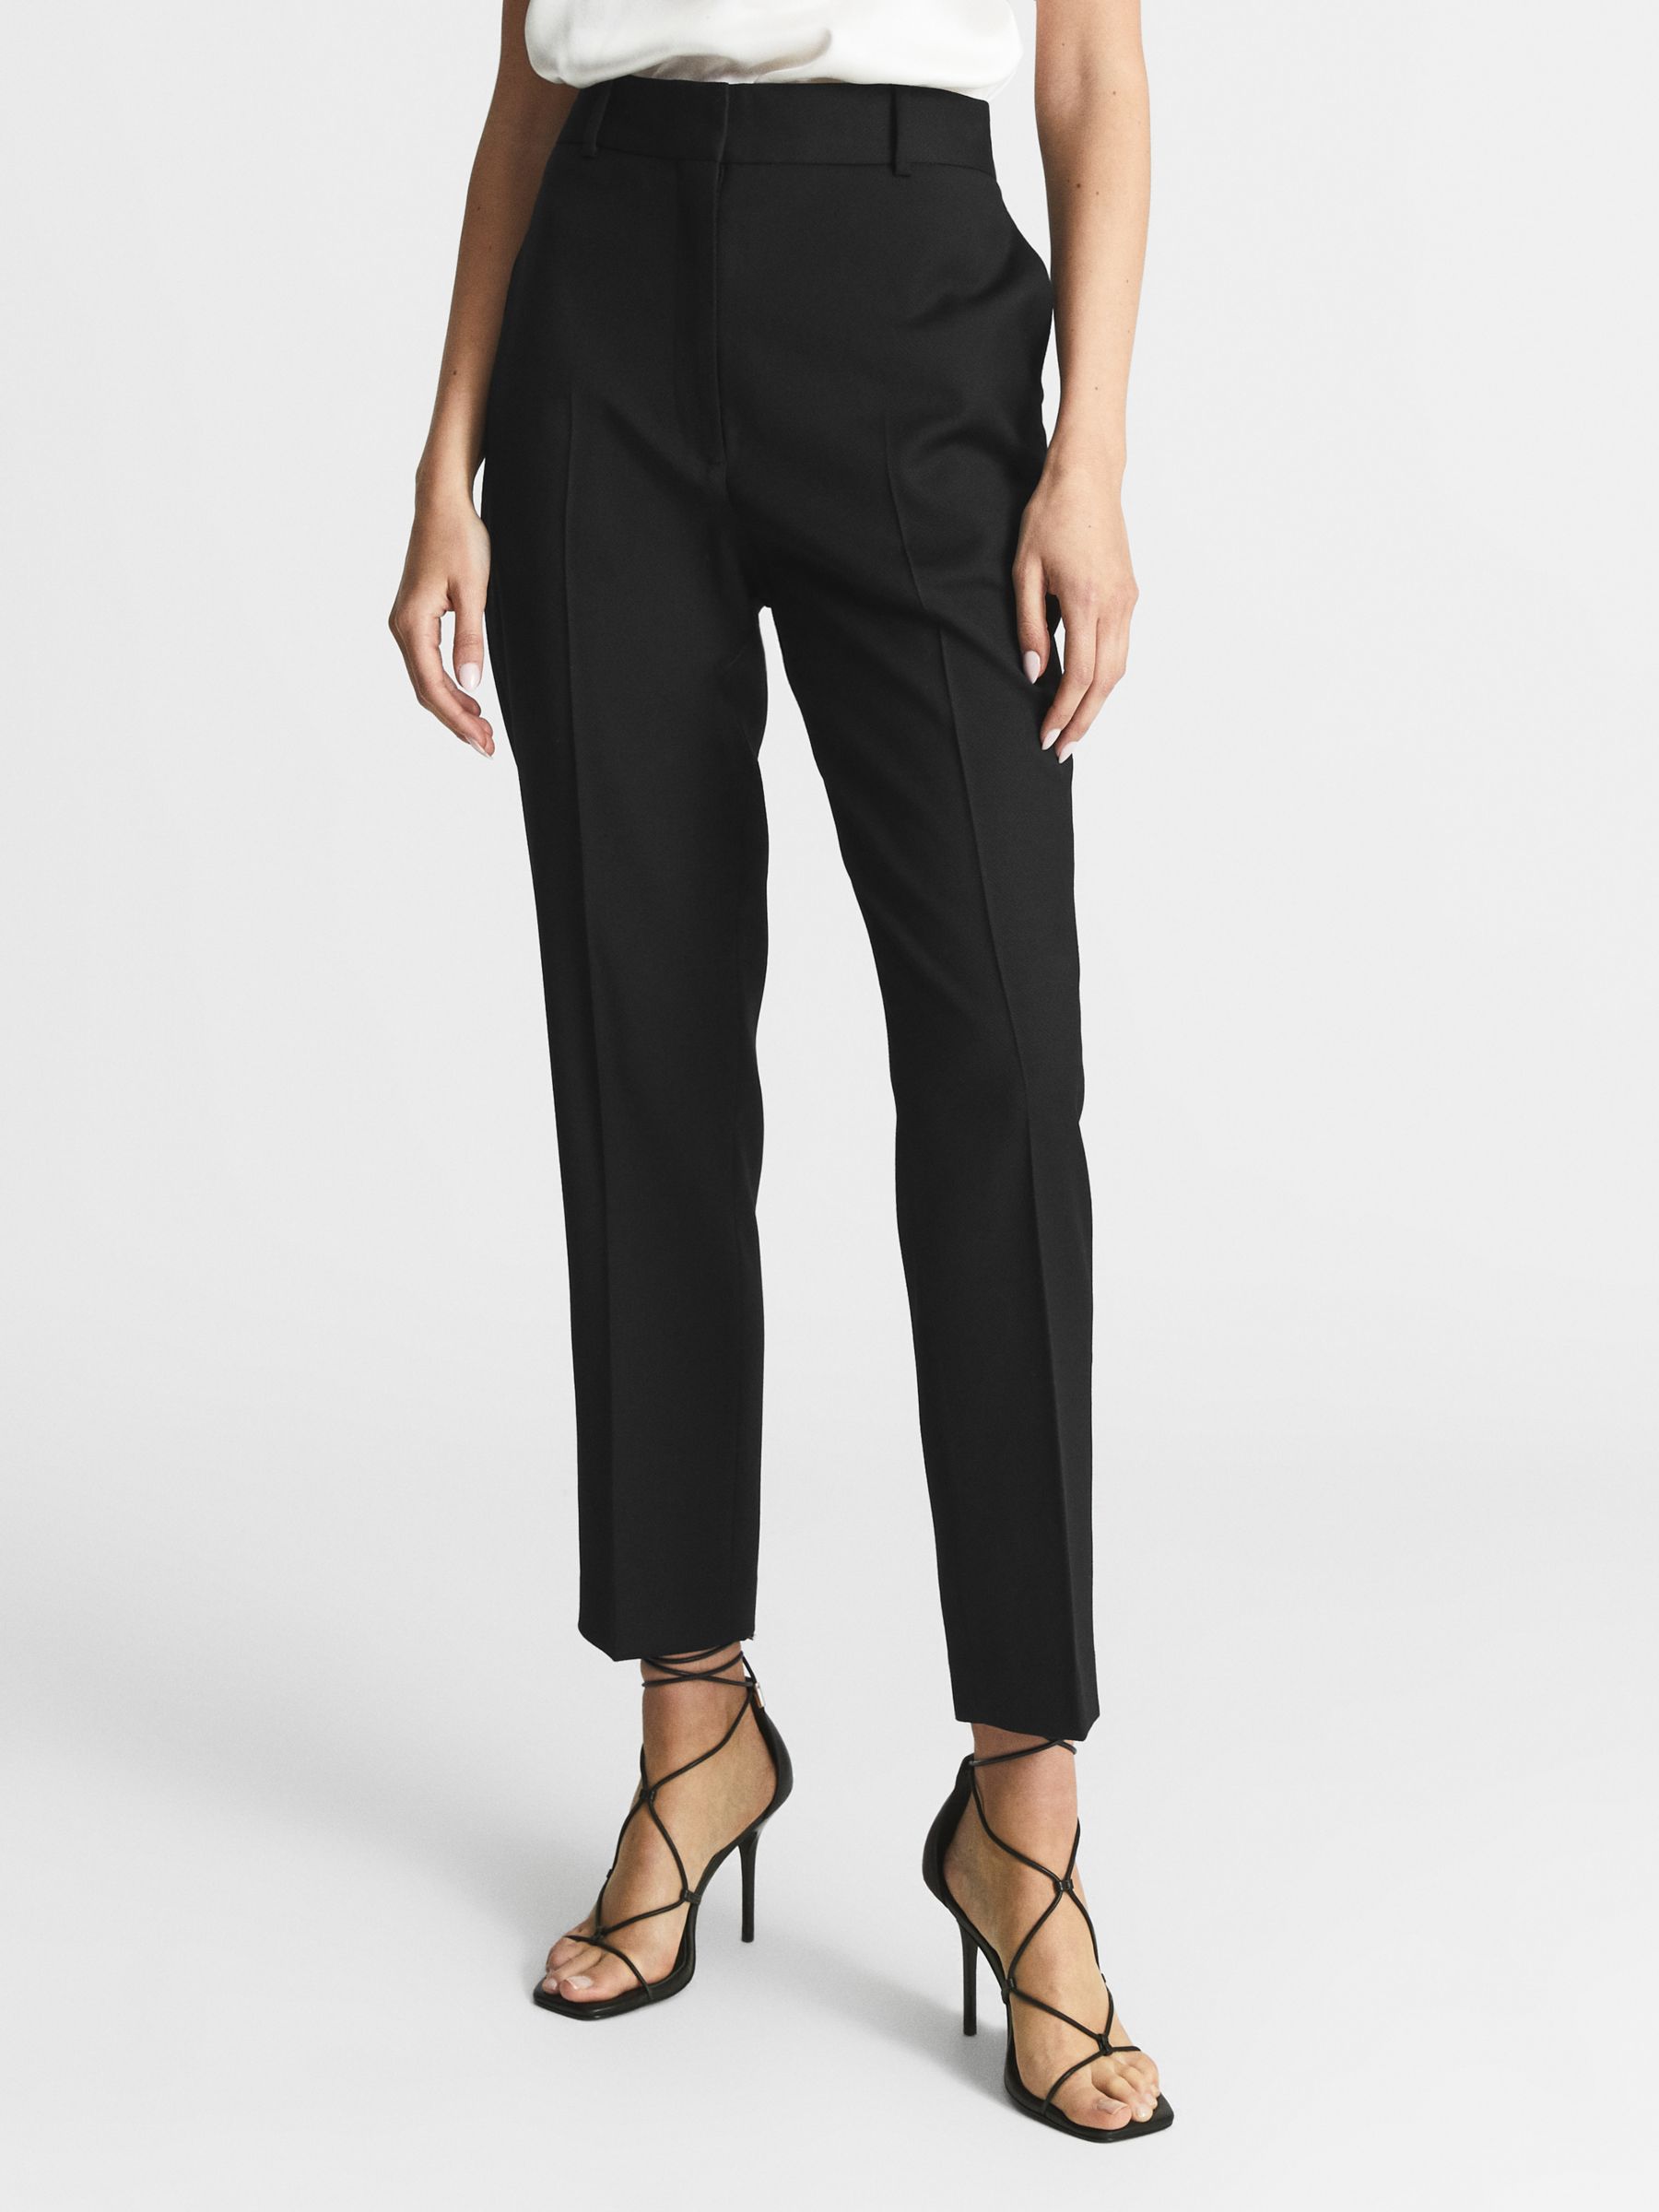 High-waisted tailored trousers - Black - Ladies